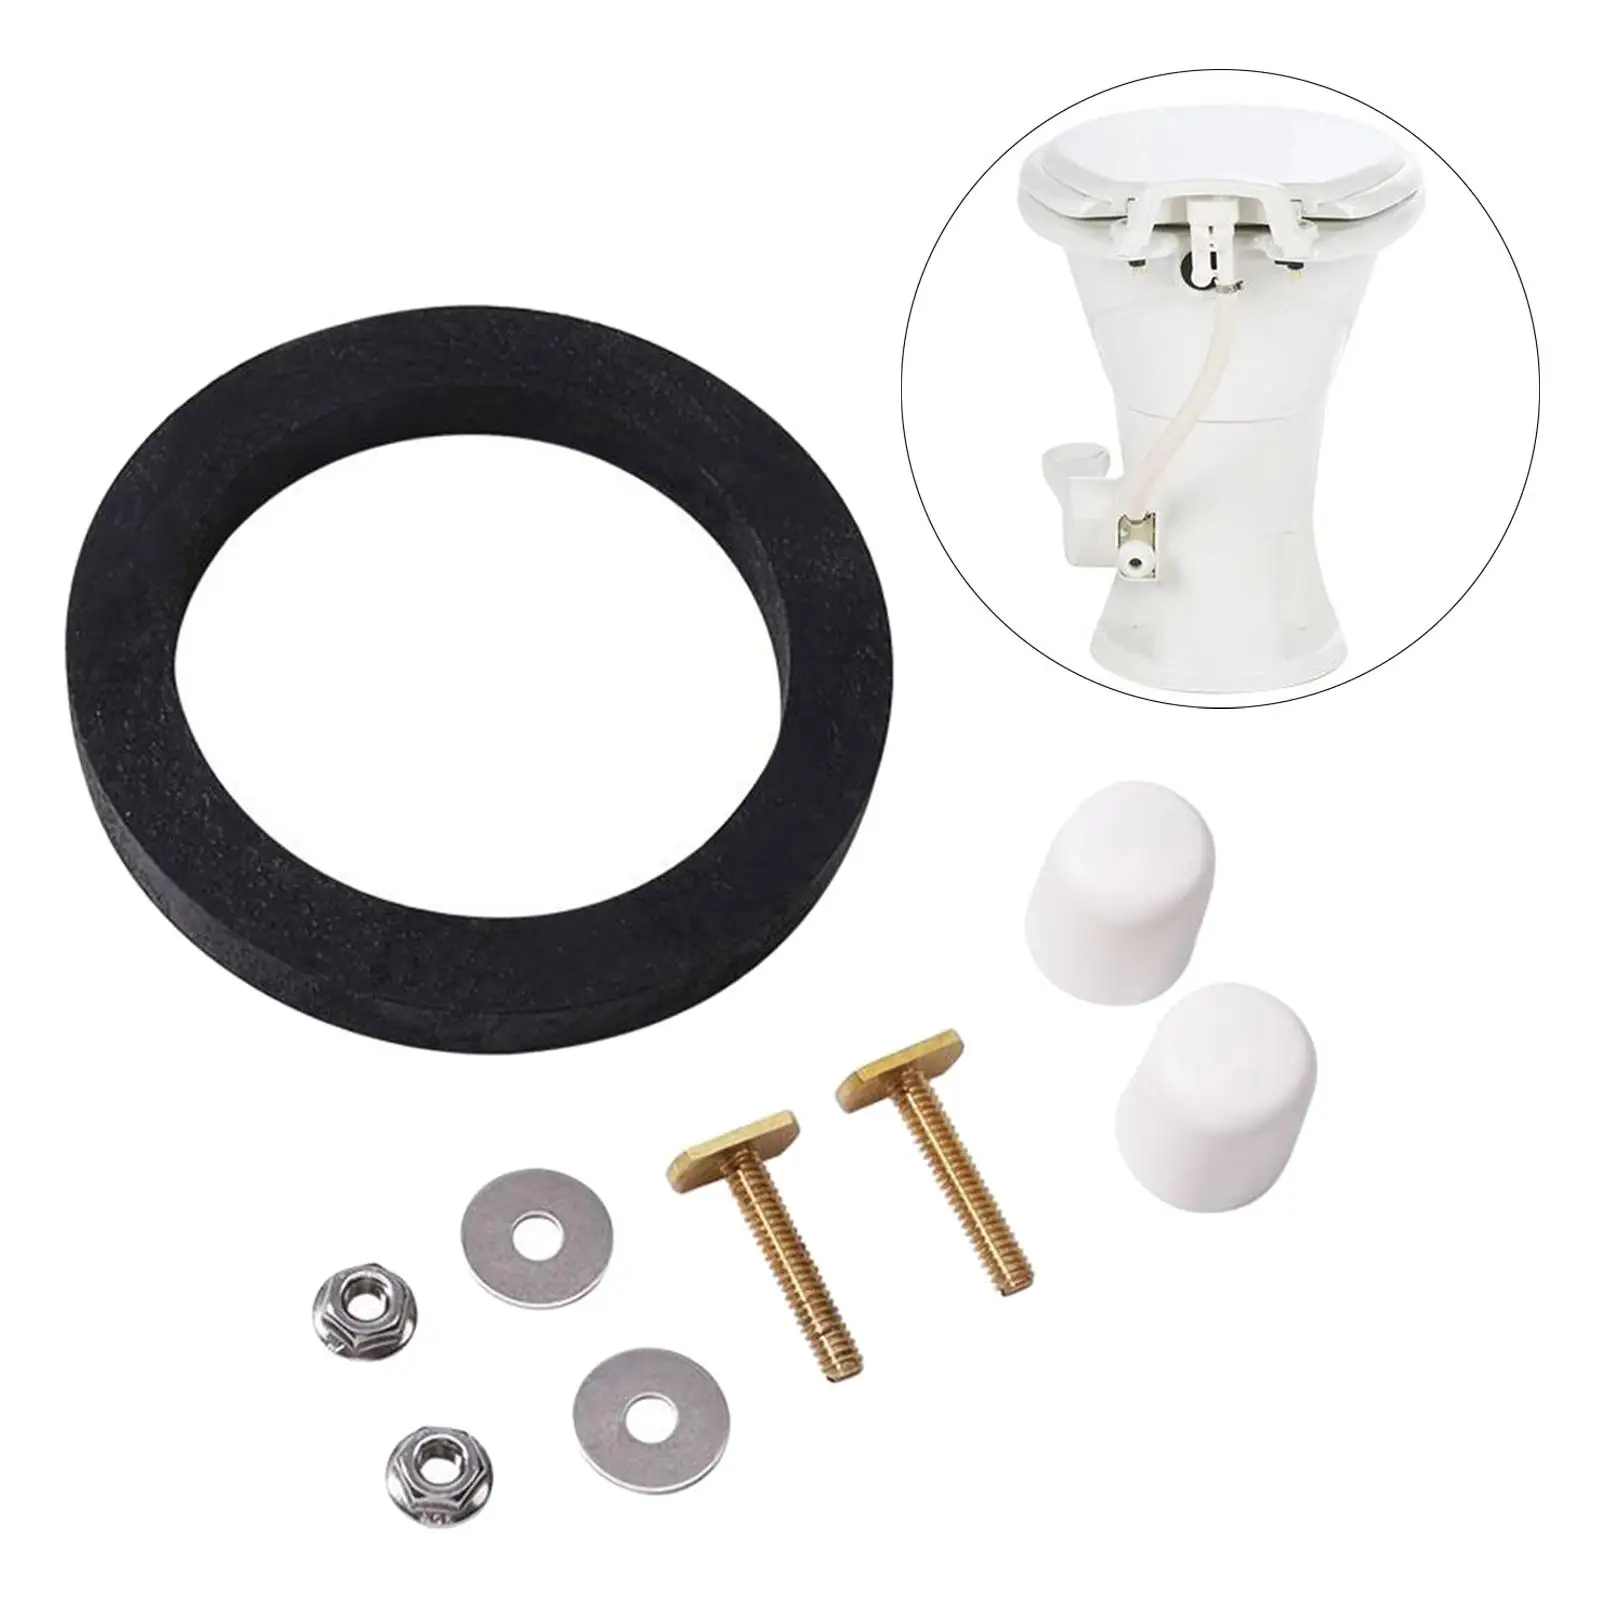 RV Toilet Seal Kit Mounting Hardware and Seal for Dometic 300 Series Toilet Accessory Easy Installation Stable Performance